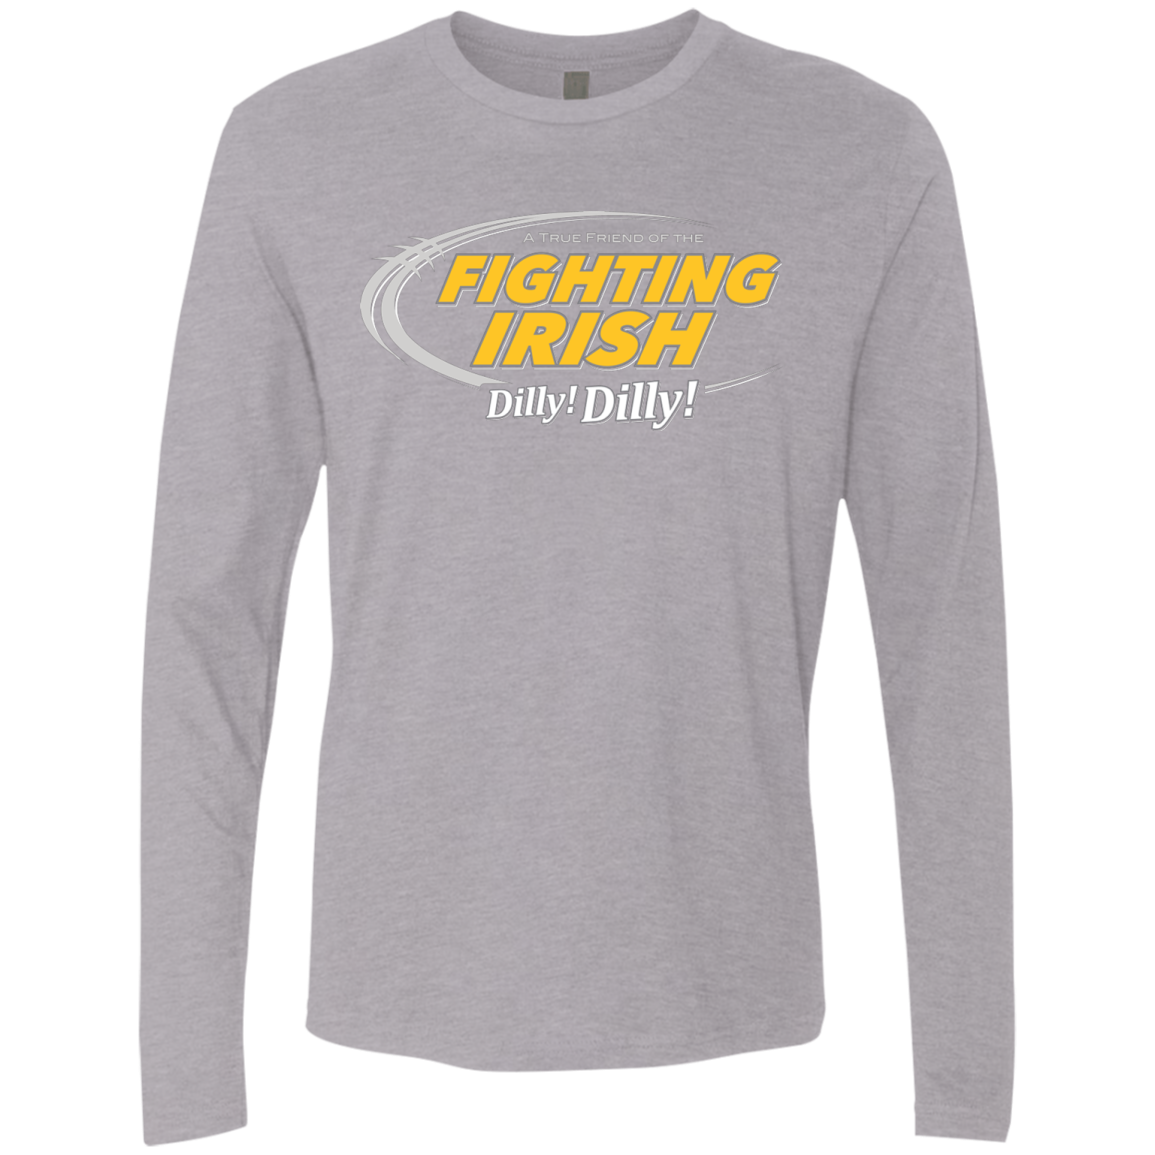 Notre Dame Dilly Dilly Men's Premium Long Sleeve